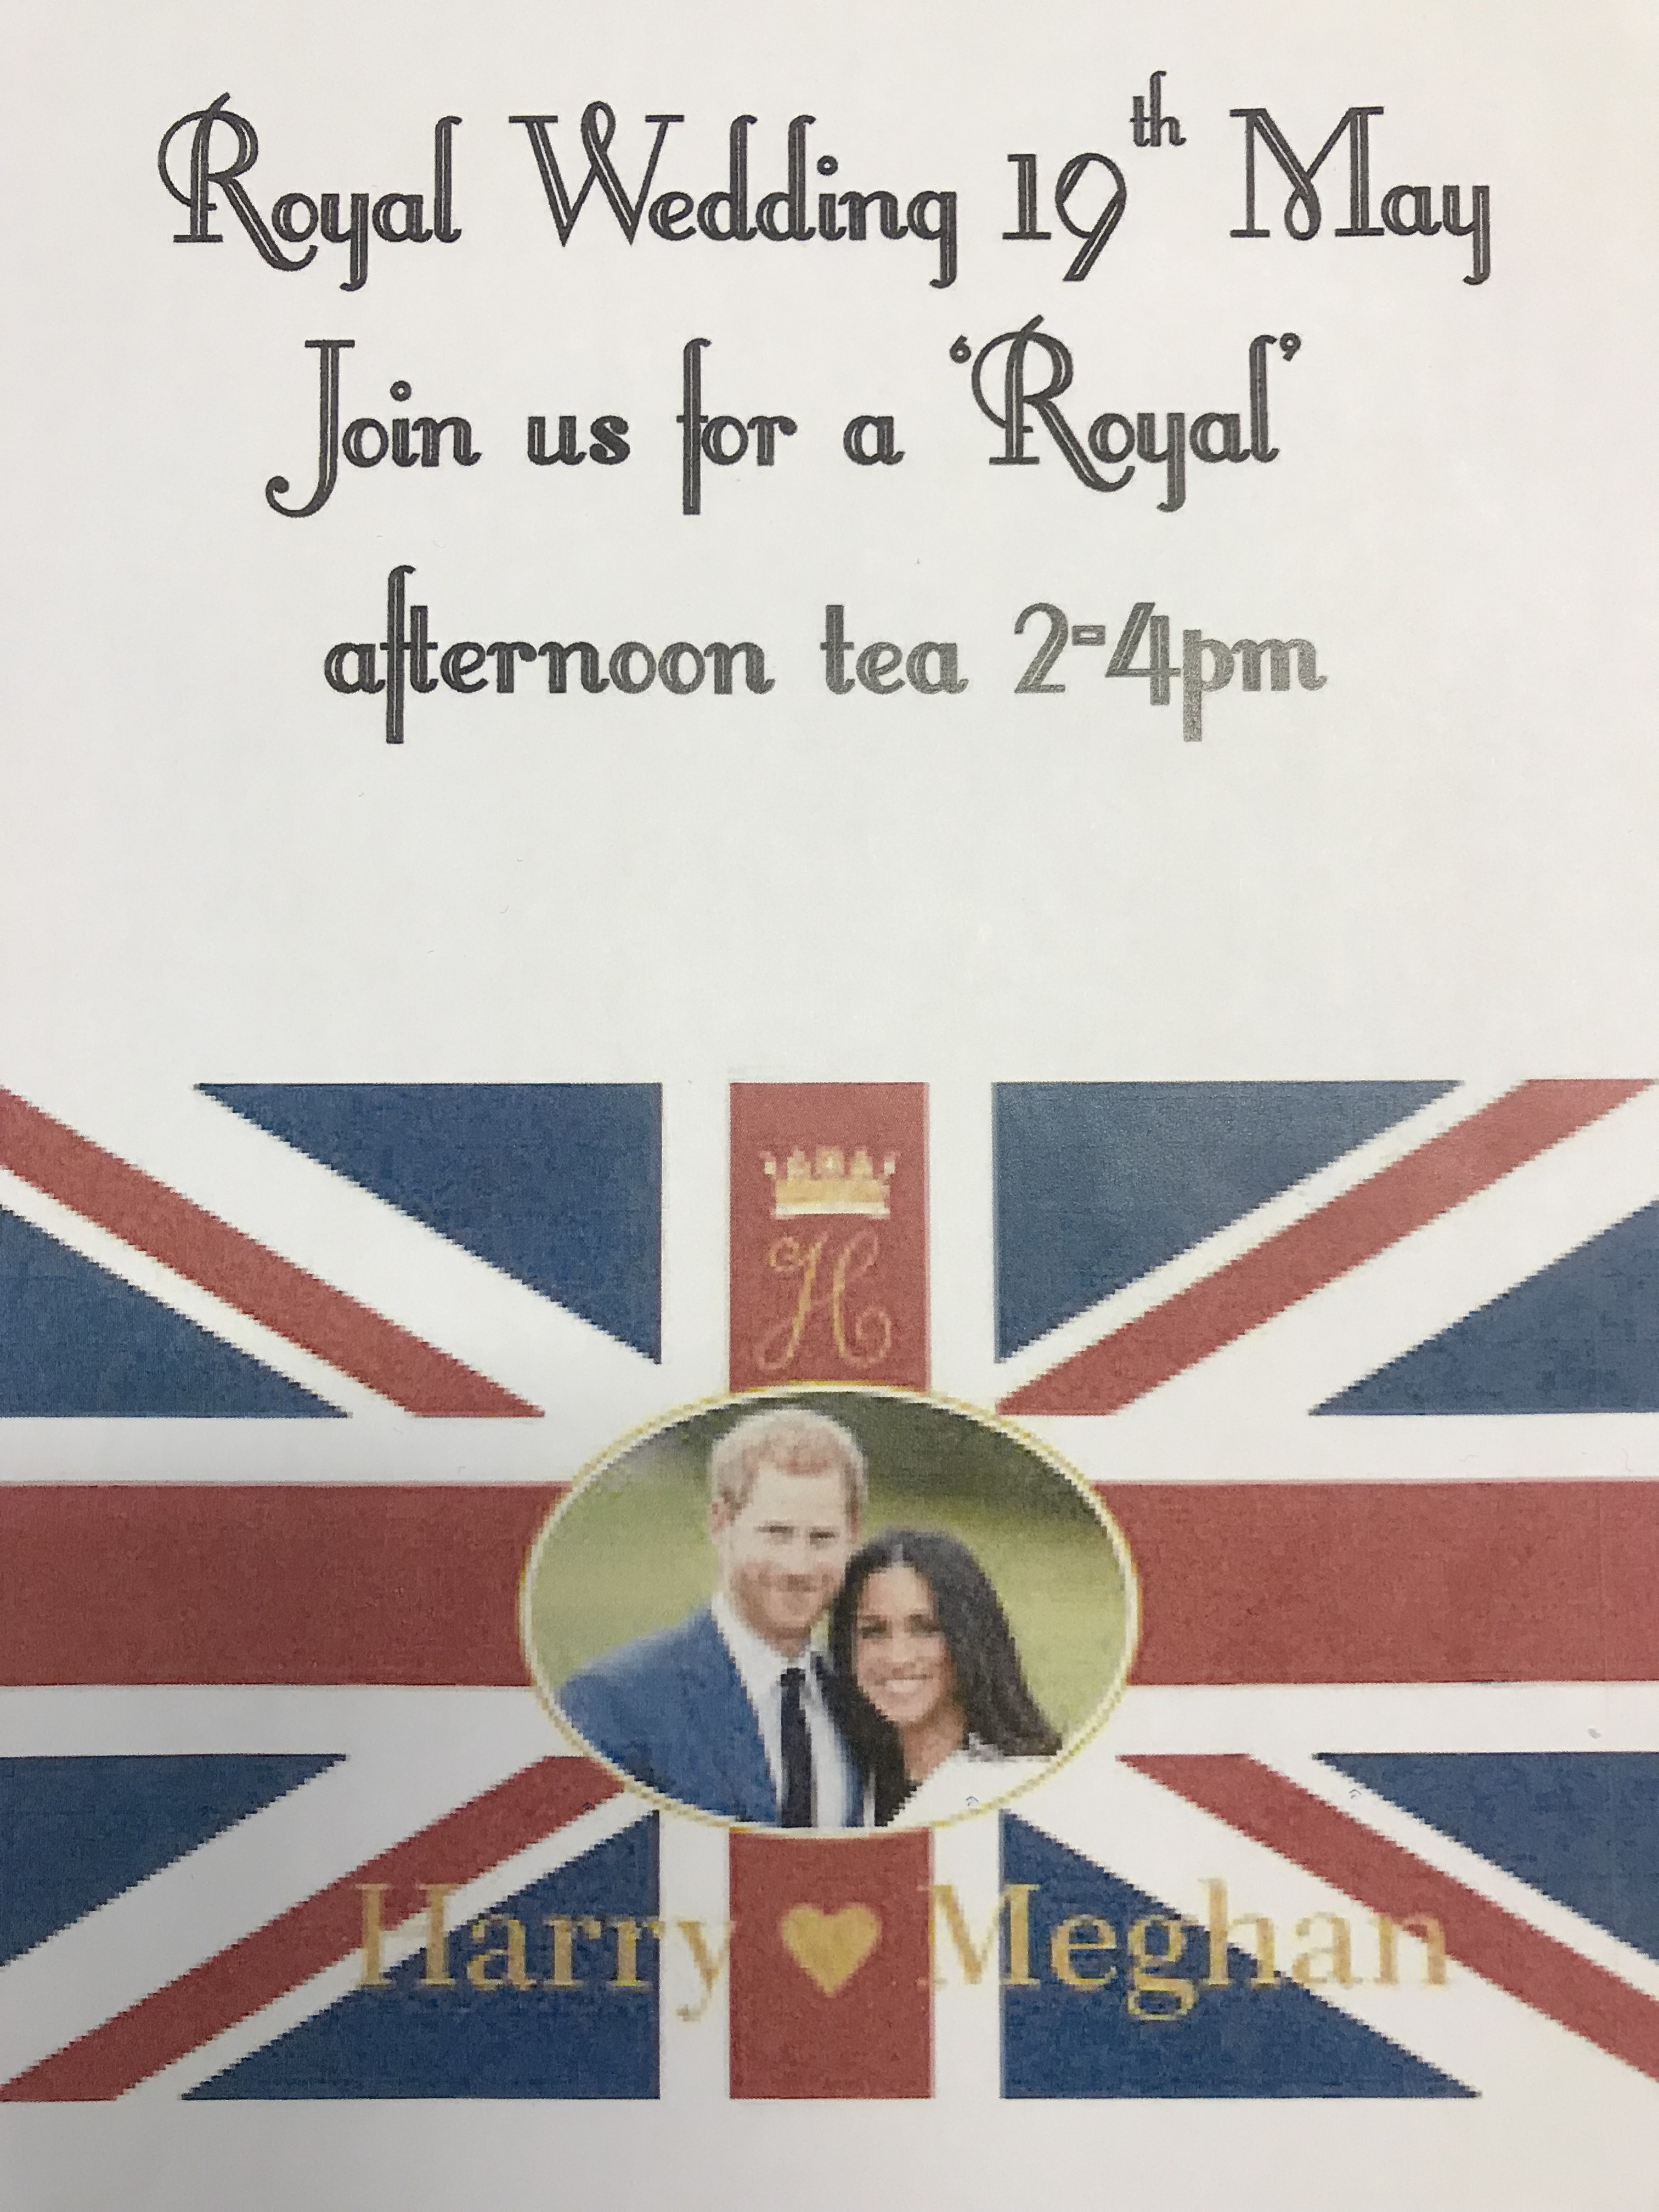 The Royal Wedding 19th May 2018: Key Healthcare is dedicated to caring for elderly residents in safe. We have multiple dementia care homes including our care home middlesbrough, our care home St. Helen and care home saltburn. We excel in monitoring and improving care levels.